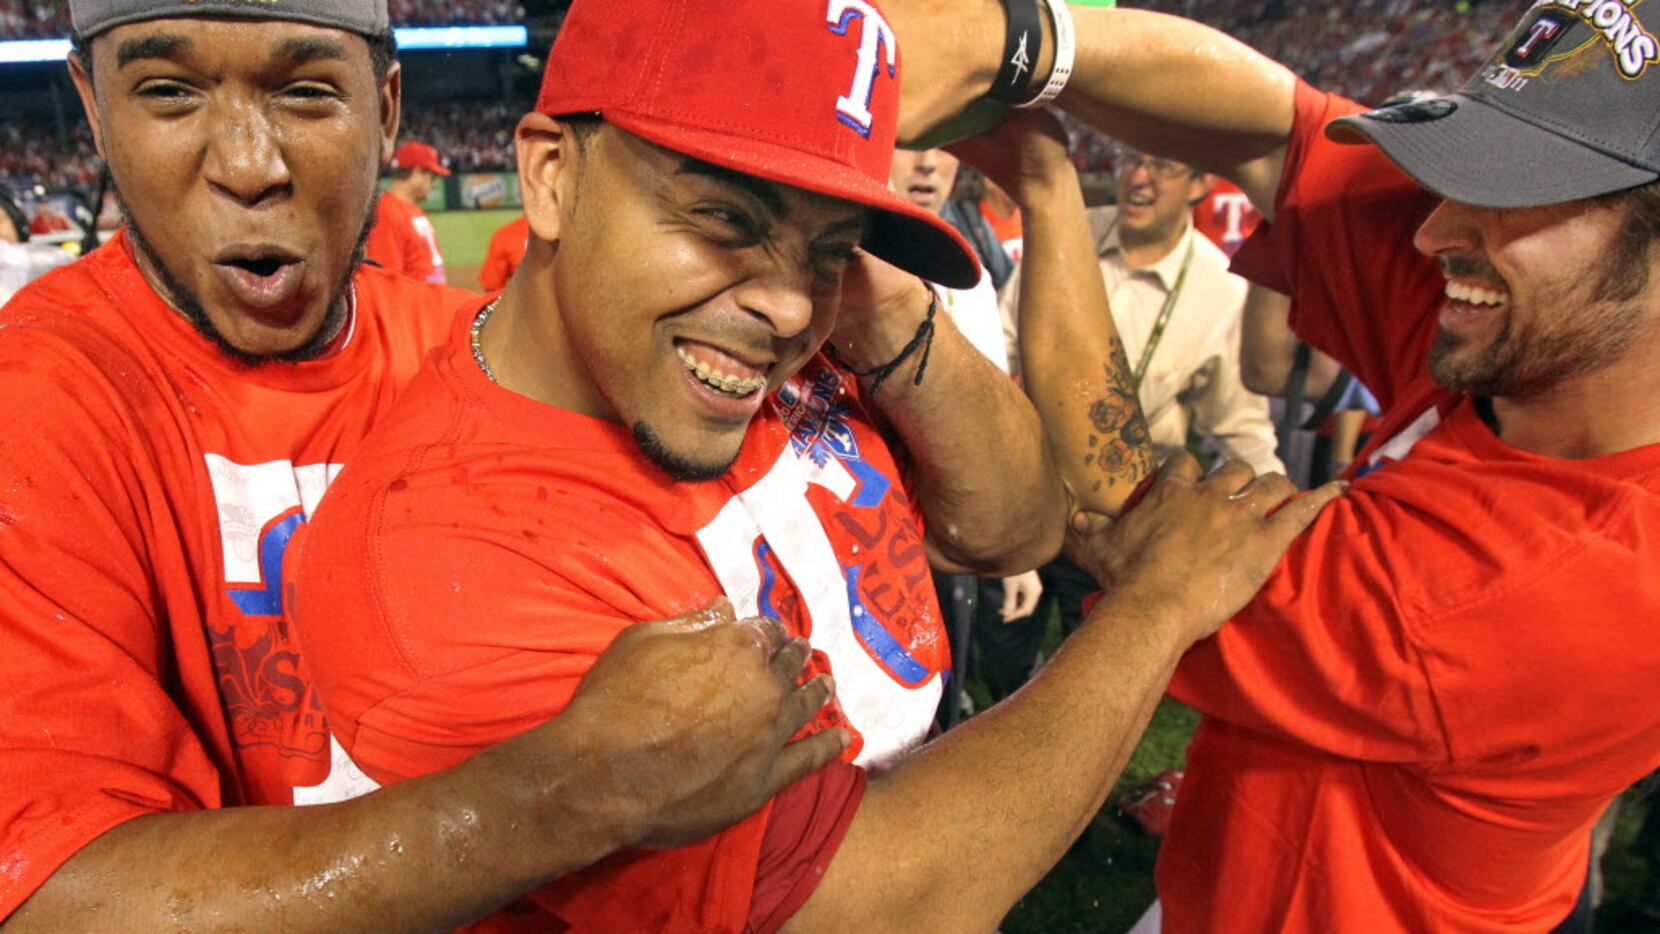 OTD: Nelson Cruz Walk-Off Grand Slam  On this day in 2011, Nelson Cruz  launched a walk-off grand slam to power the Rangers to a 7-3 victory and a  2-0 lead in